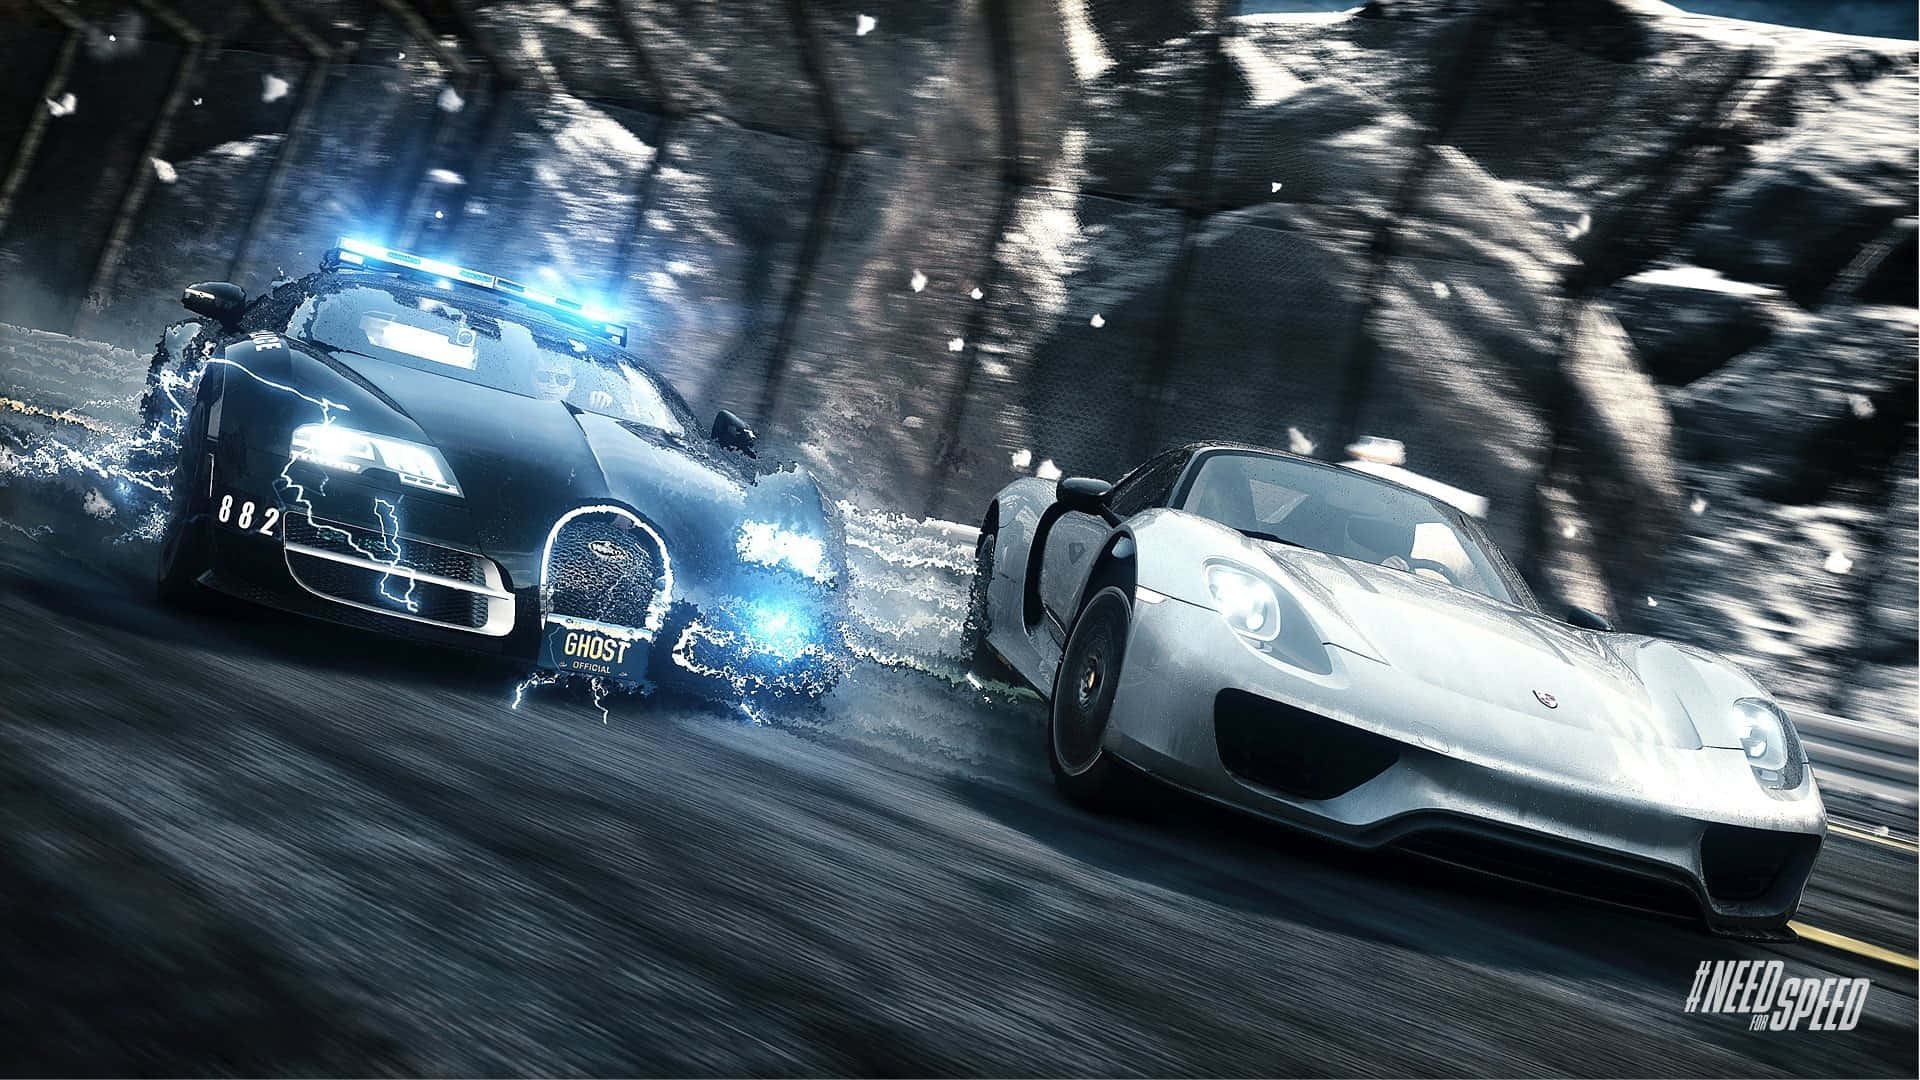 Intense Race Action in Need for Speed PC game Wallpaper